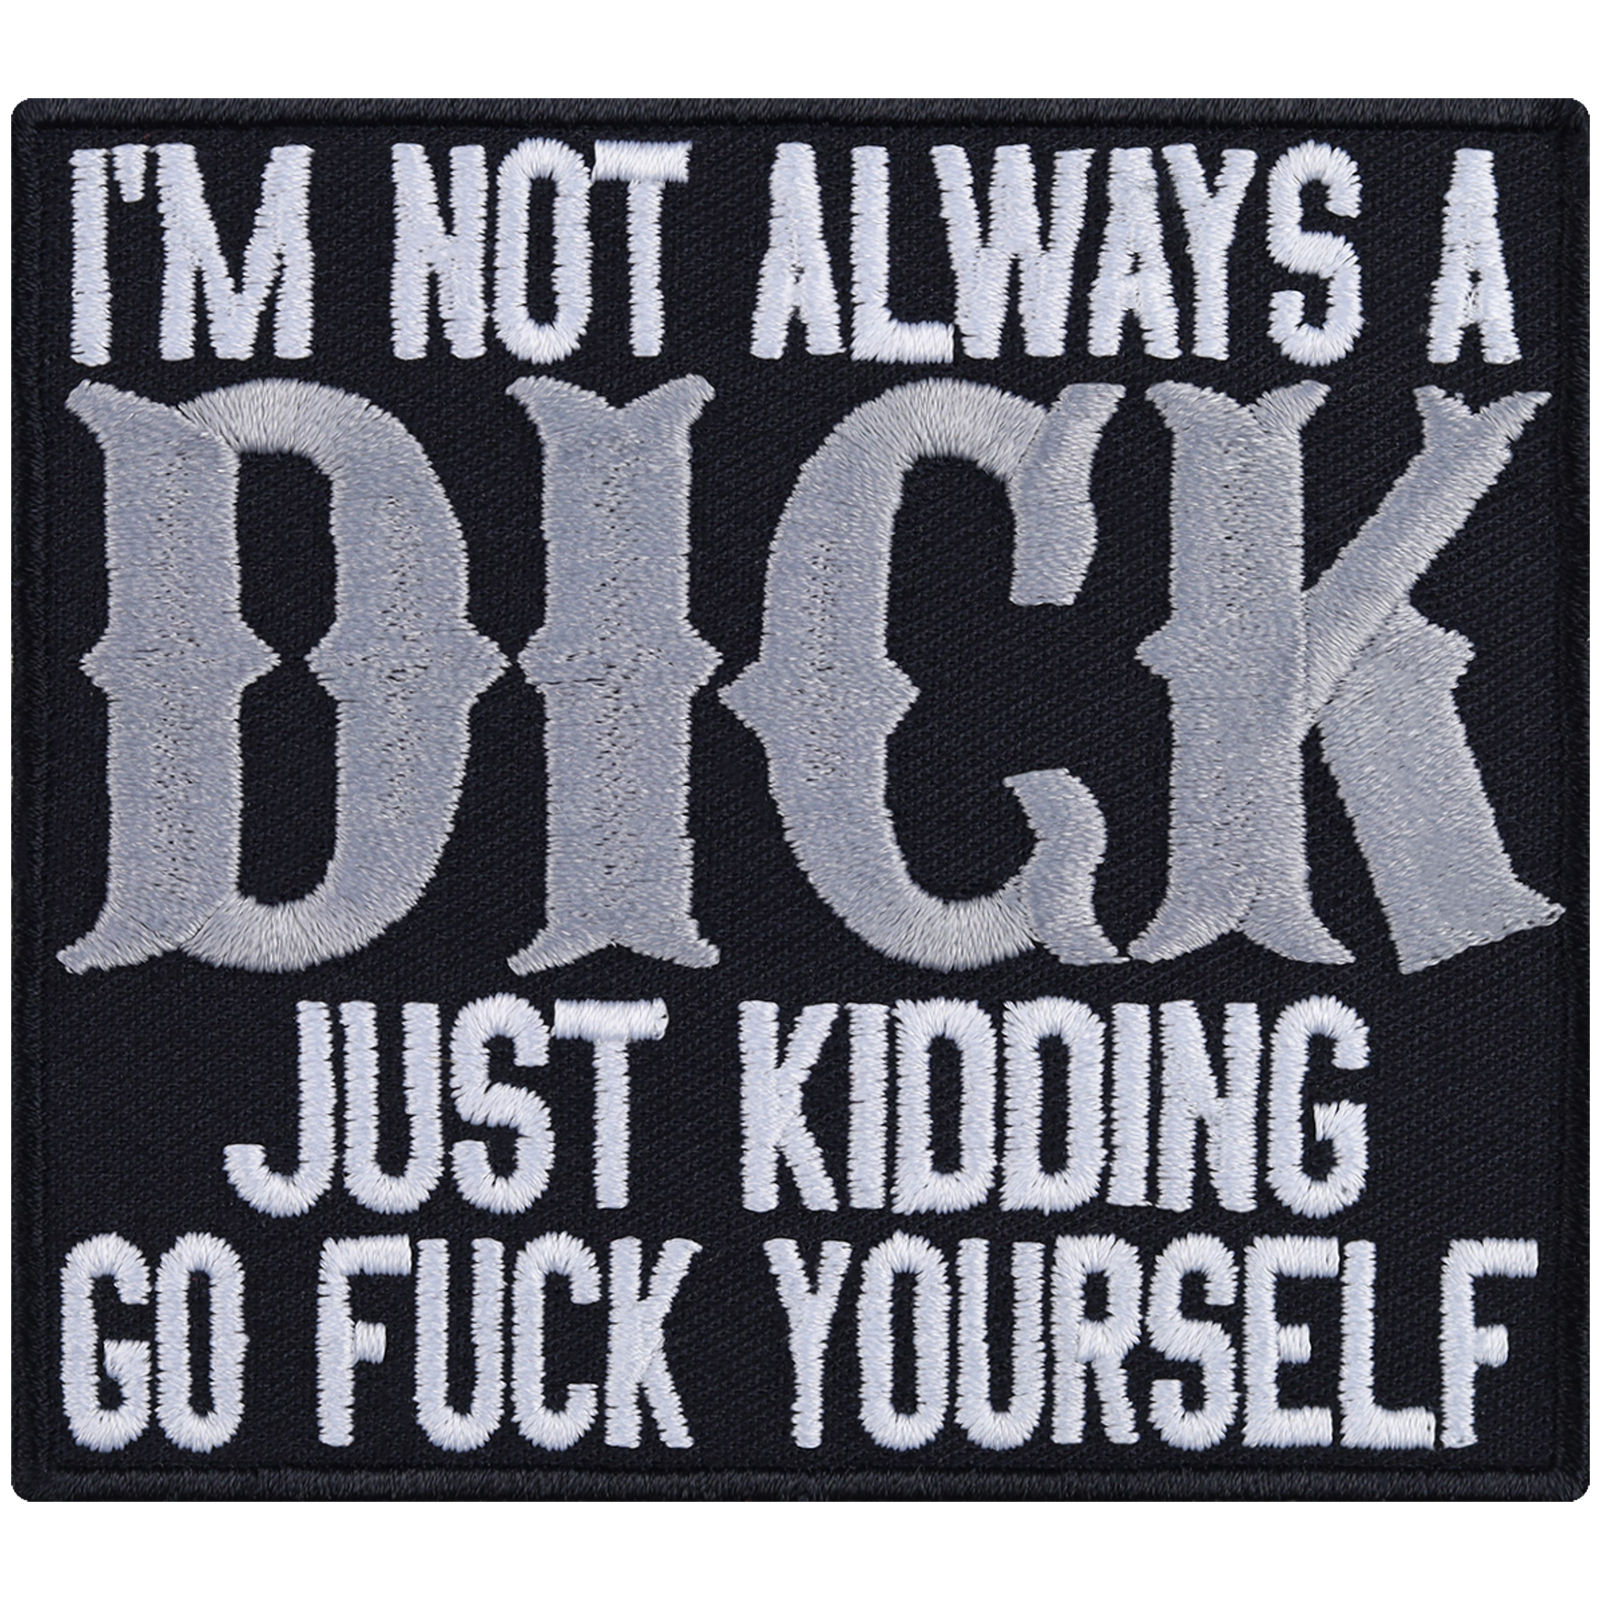 I'm not always a dick (Just kidding go fuck yourselfe) - Patch